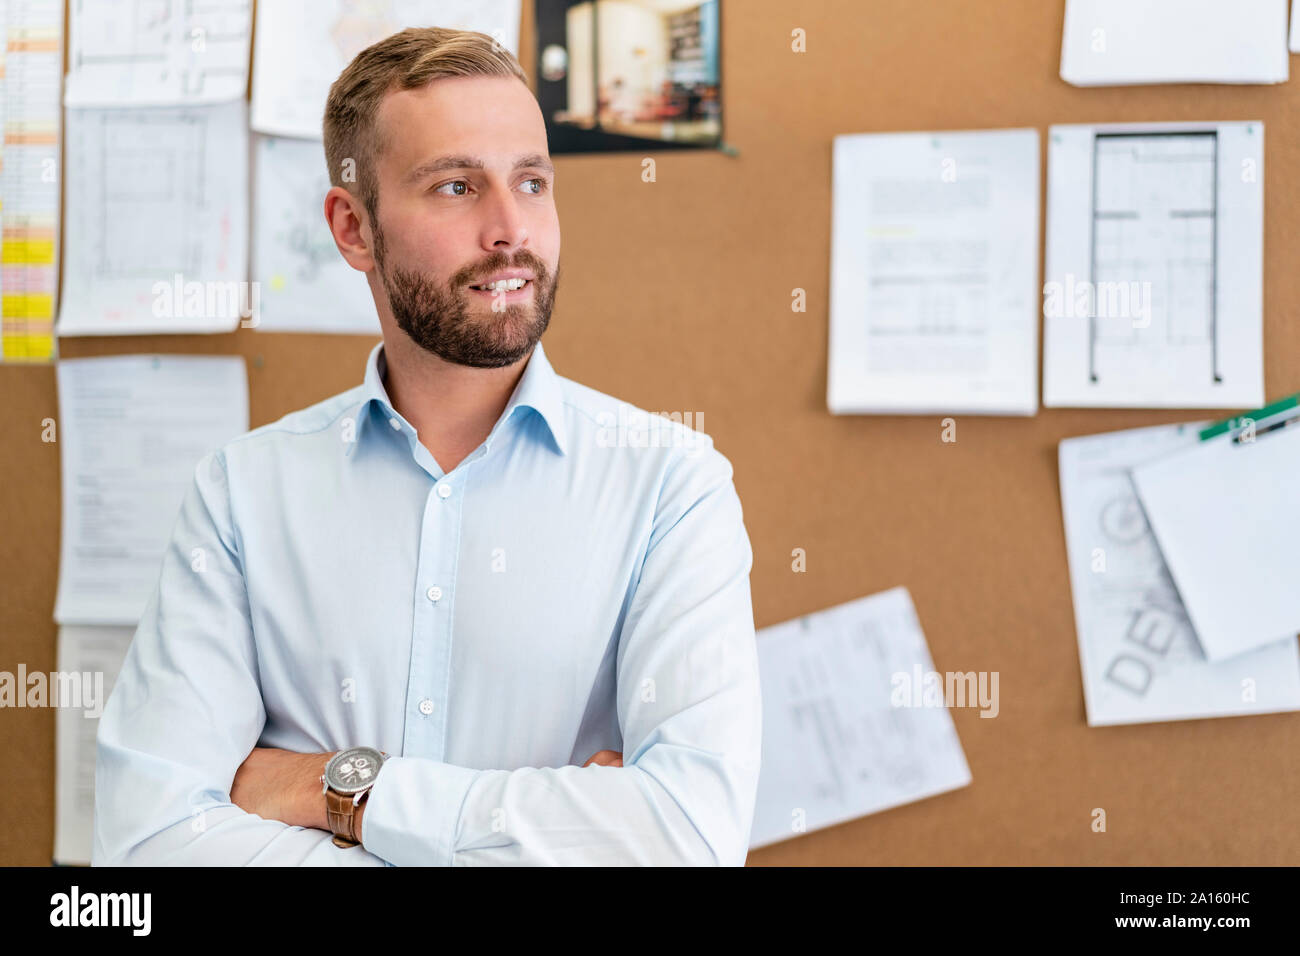 Portrait of businessman at pinboard in office Stock Photo